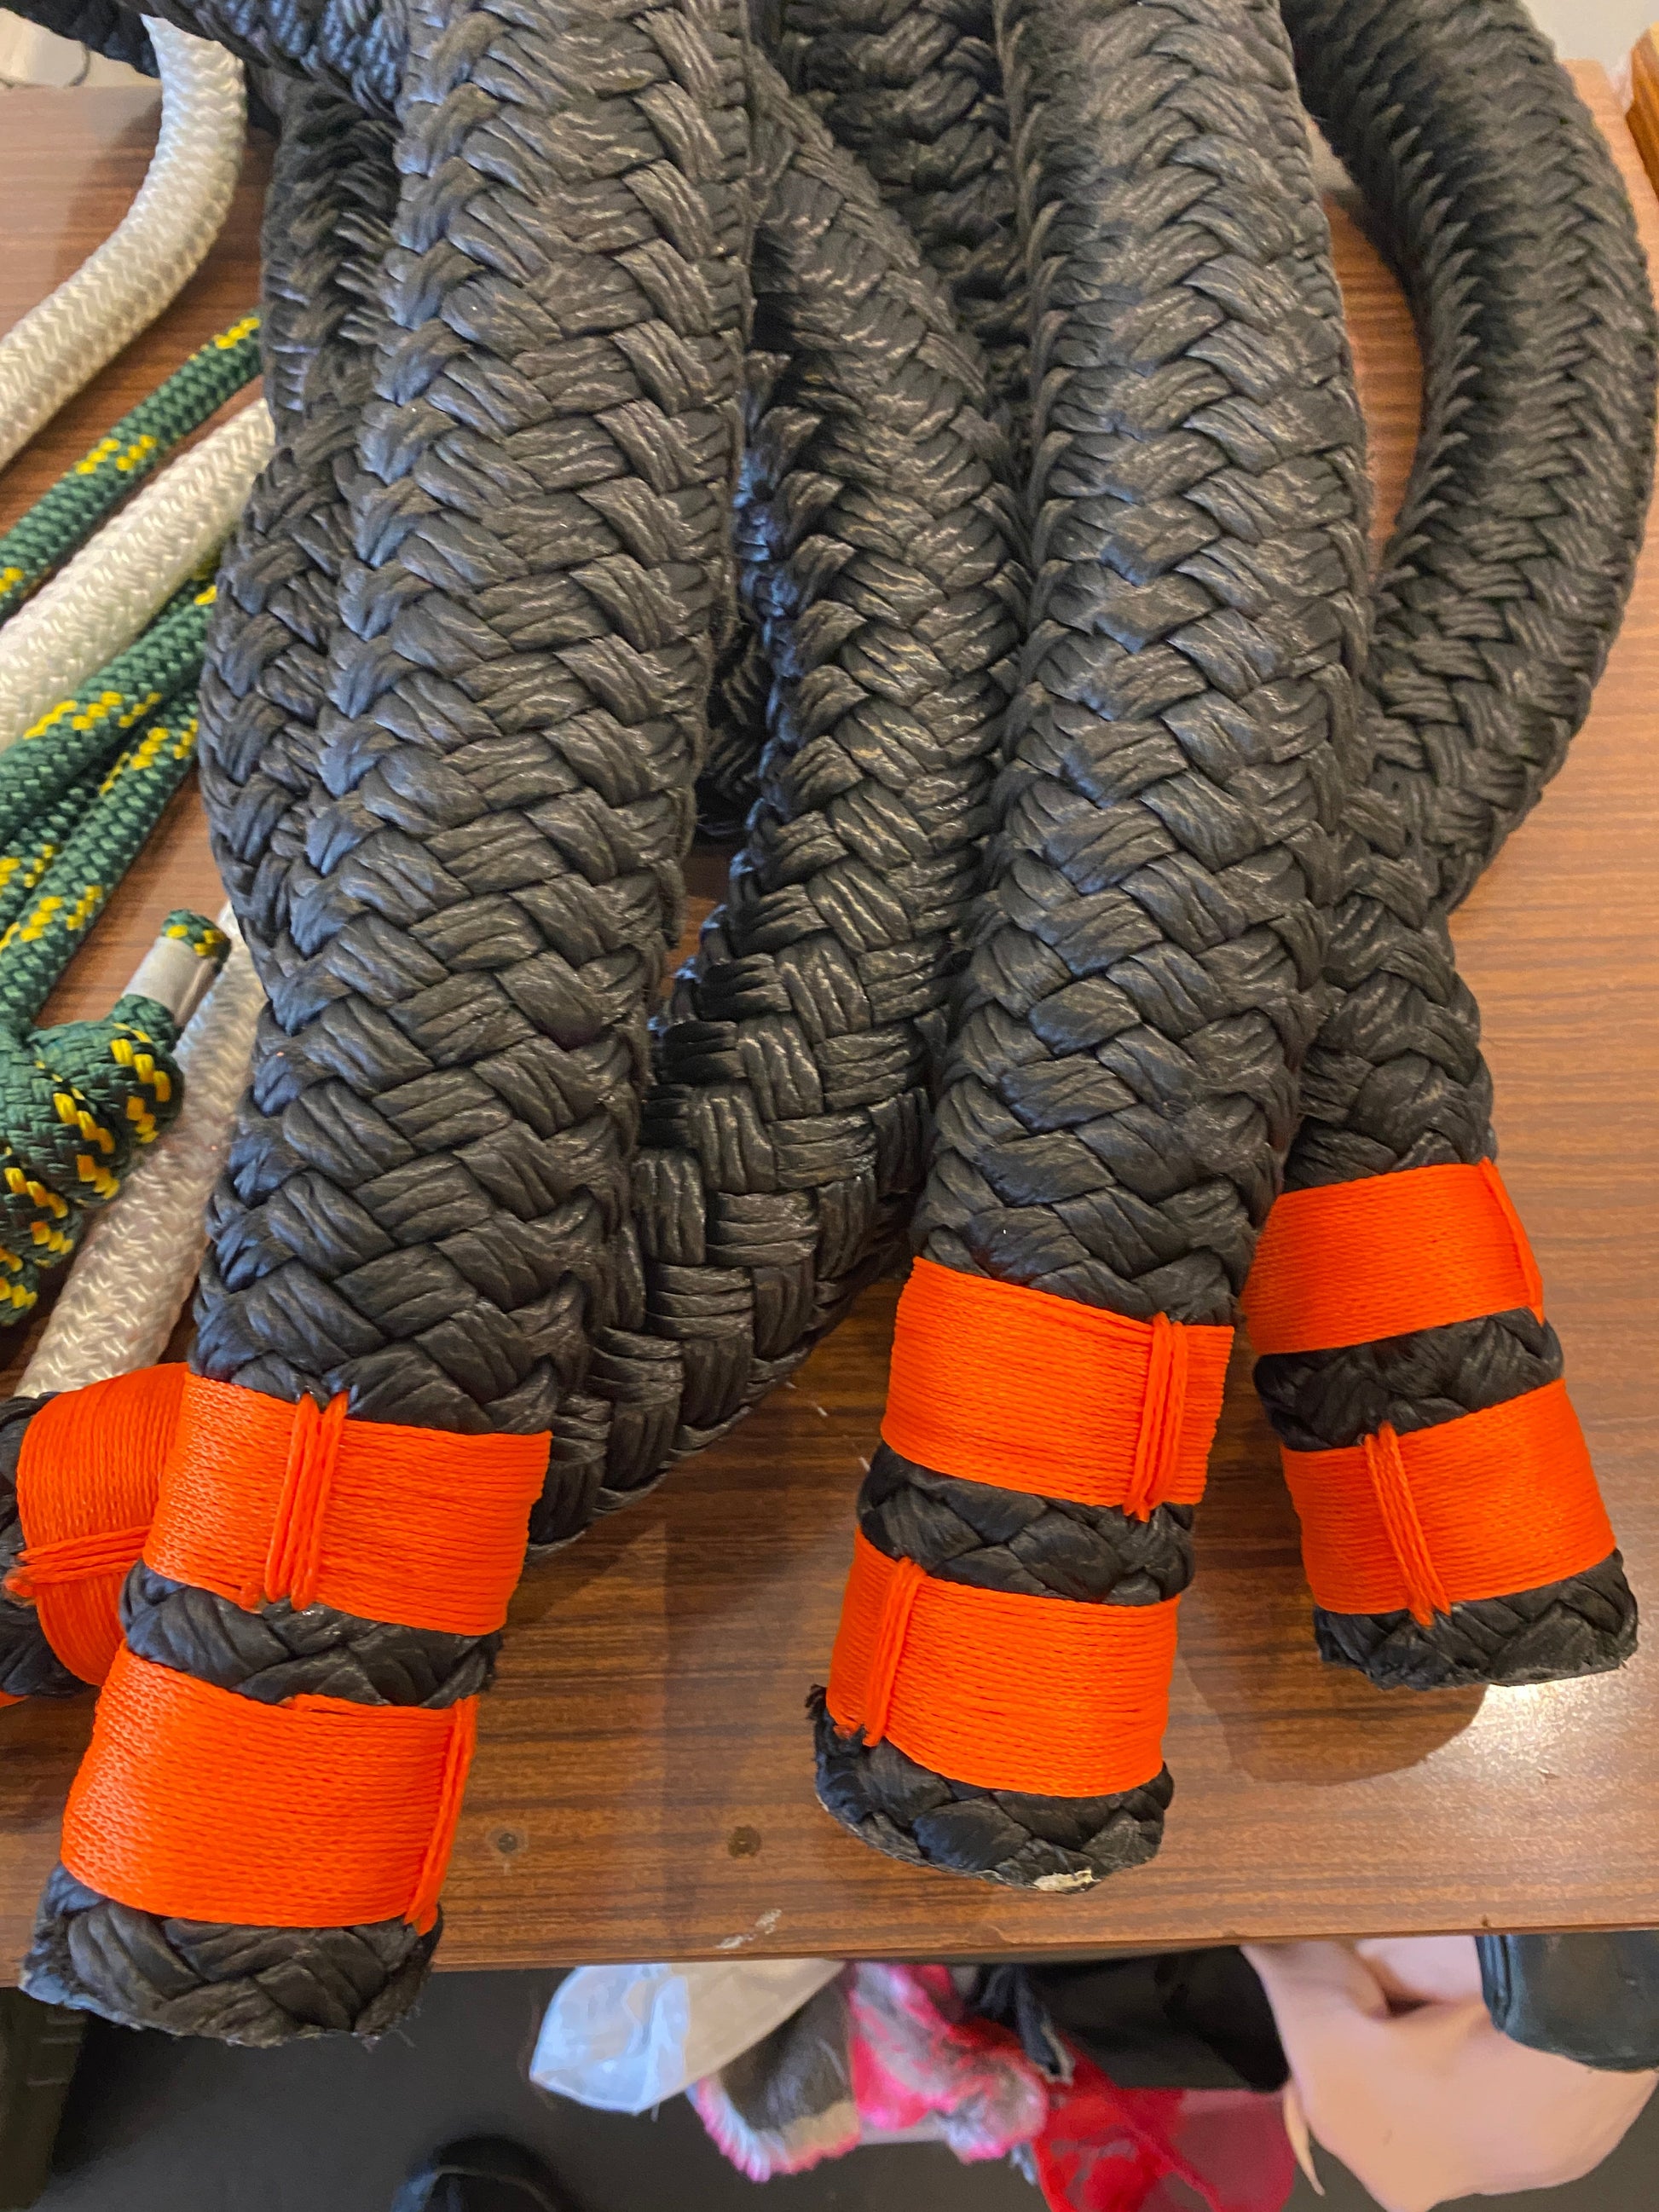 THE WHALE 4.5 KG - windingropes